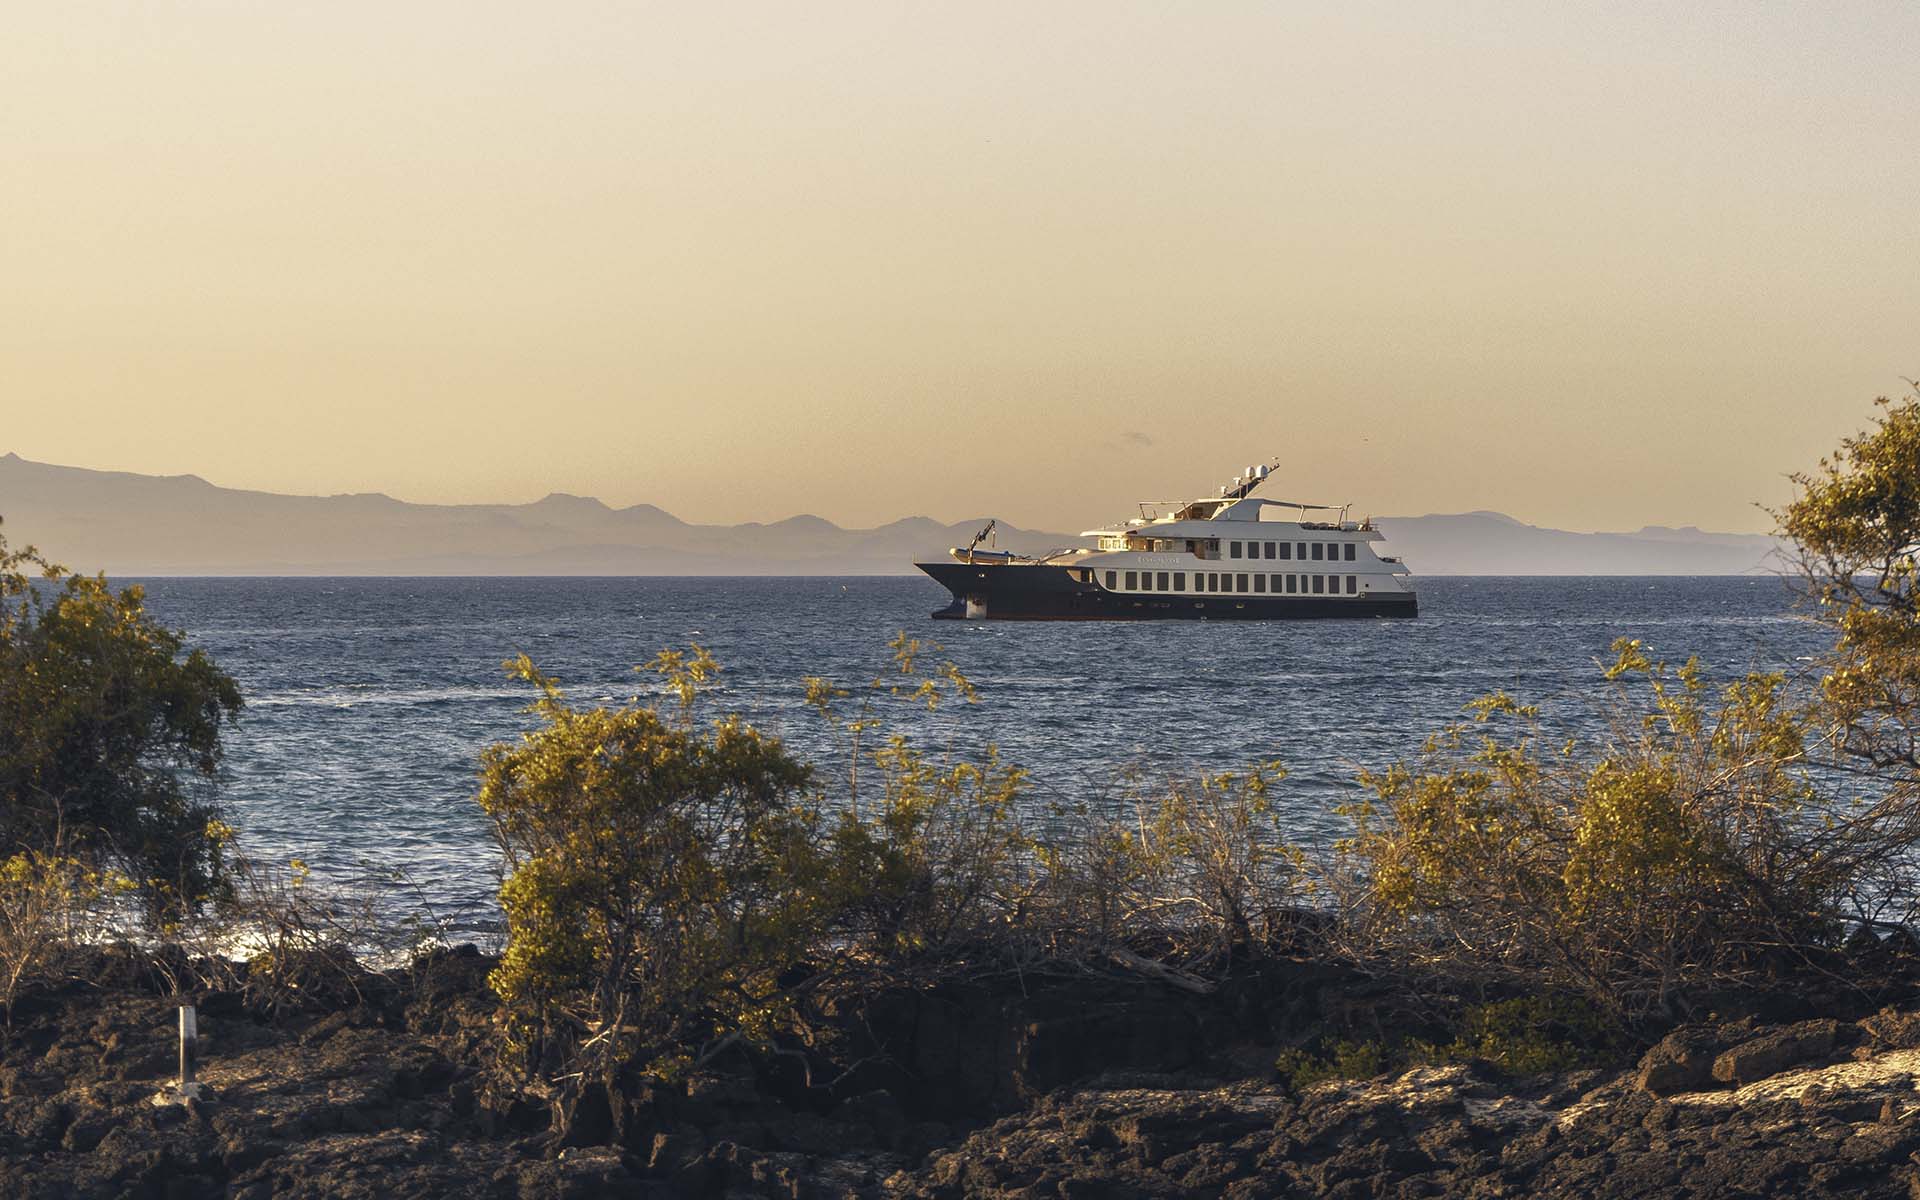 A new blue-hulled Galapagos cruise ship seen on the water with bushes in the foreground and mountains behind it.